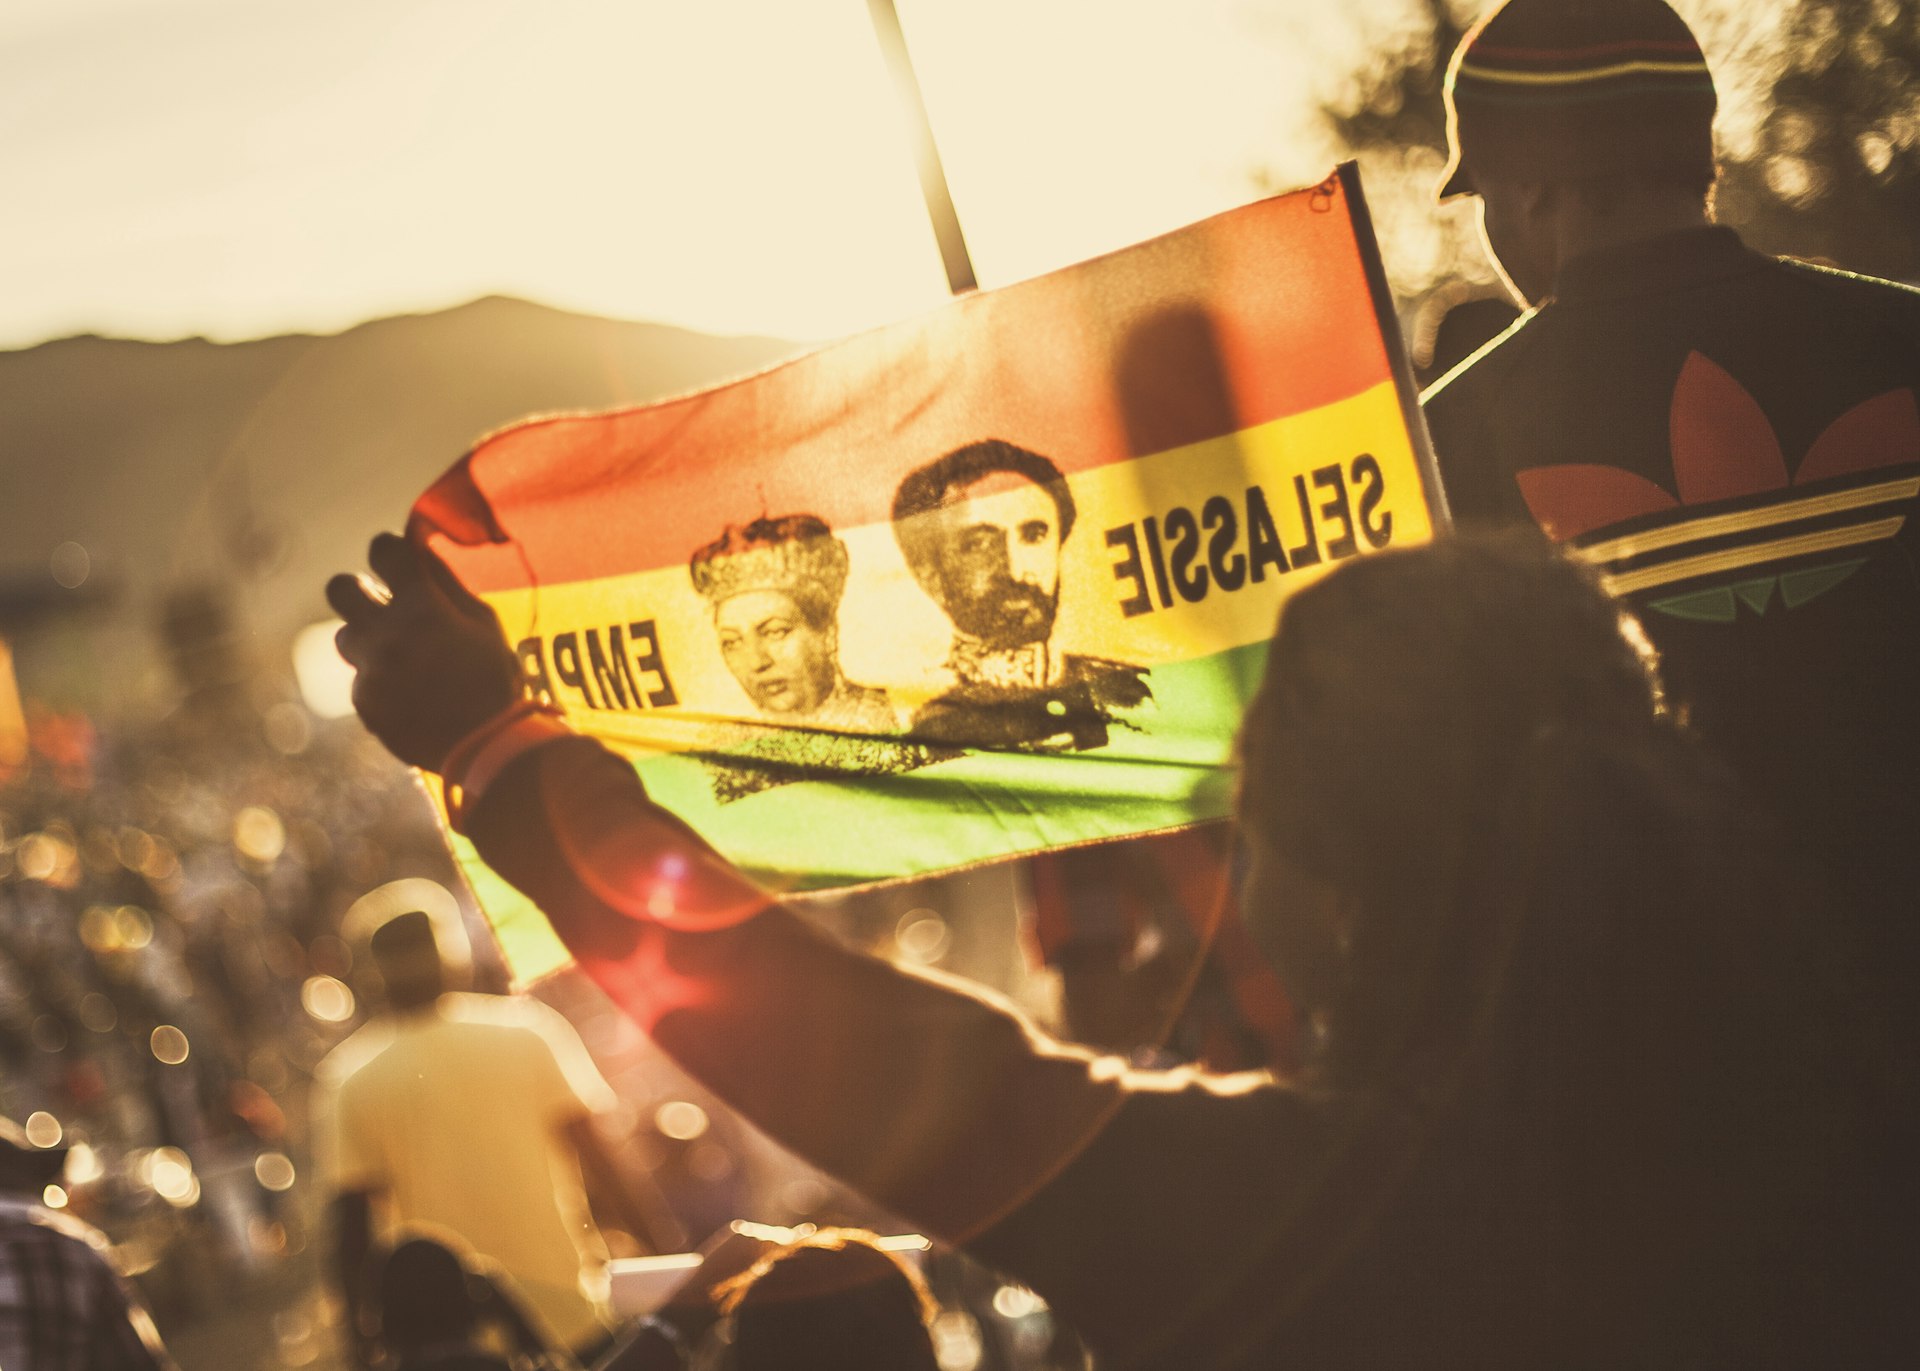 A woman waves a flag with a picture of Haile Selassie against sunrise while watching Capleton perform at the Rebel Salute Festival 